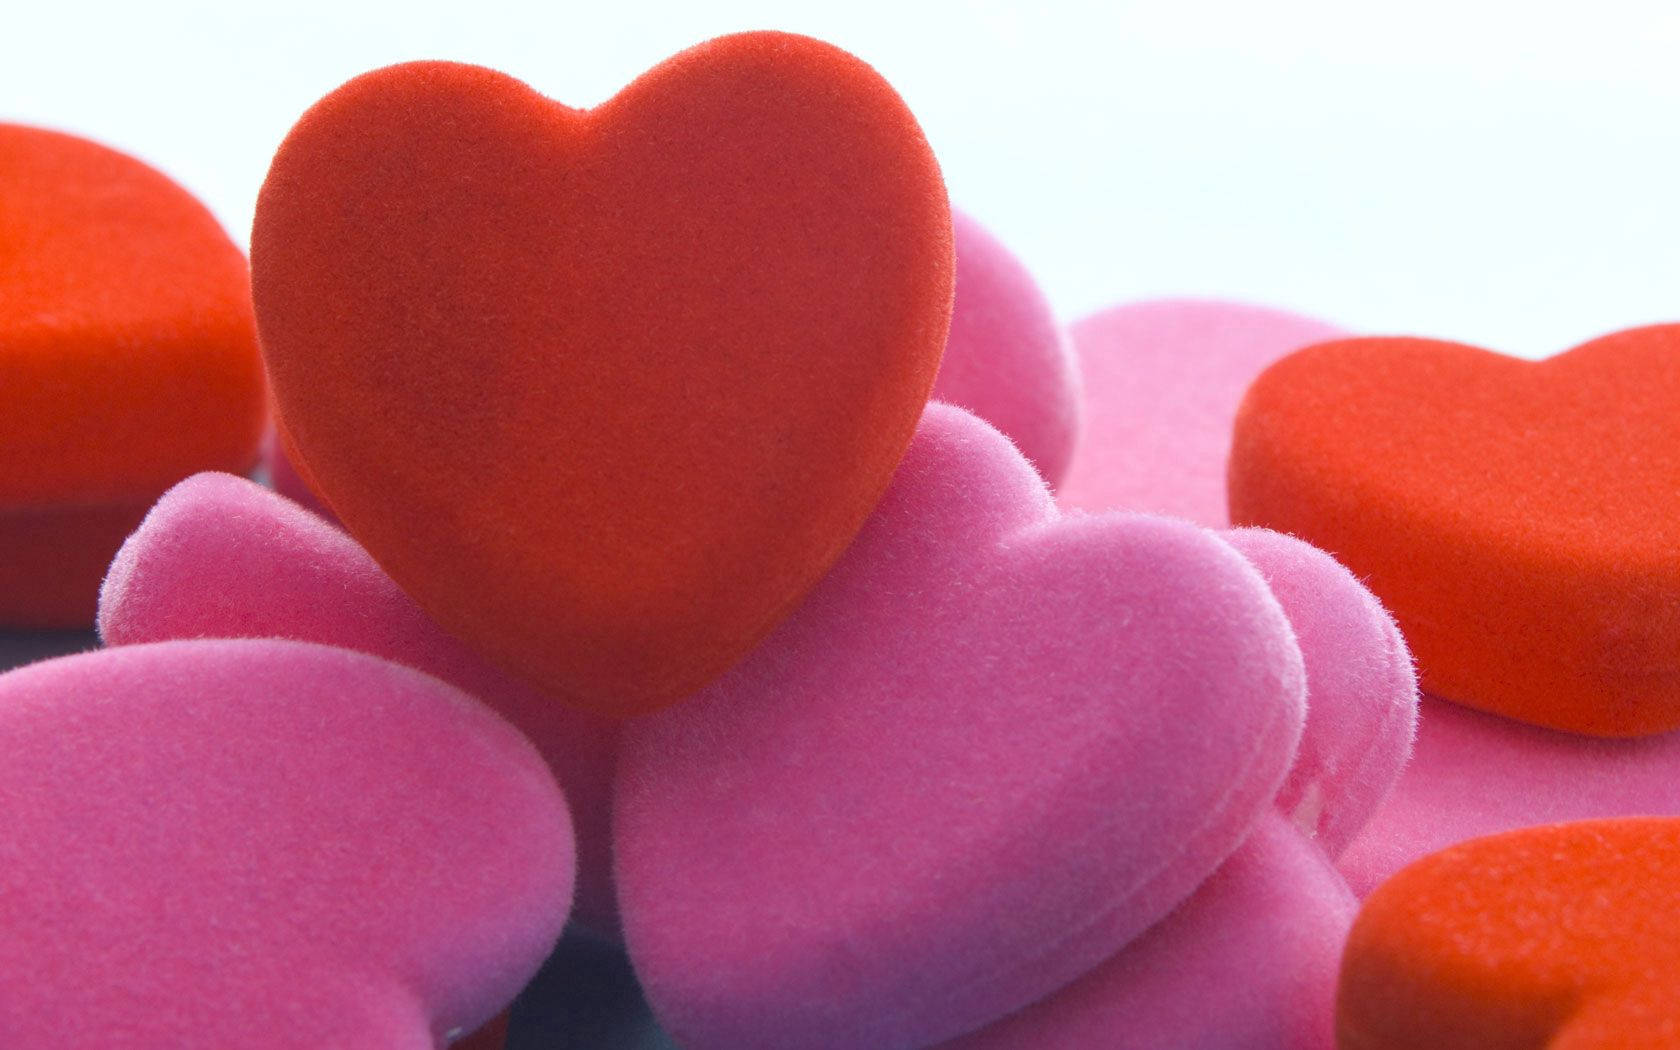 Express Your Love With This Beautiful Heart Made Of Pink And Red Foams.